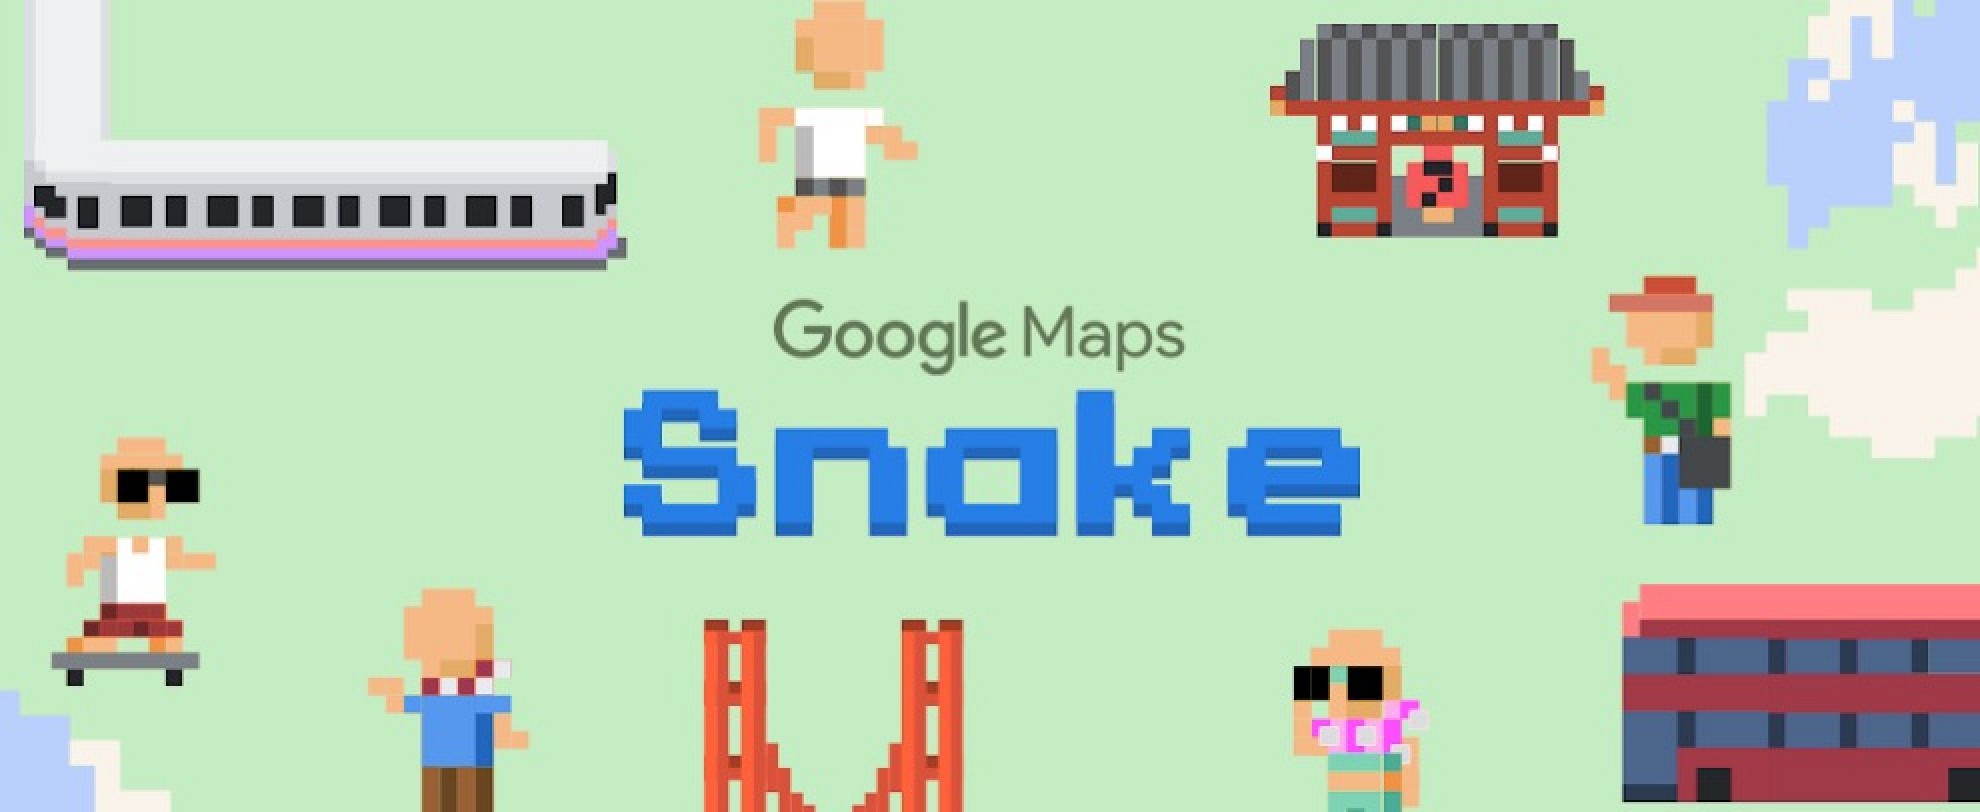 Google Maps Gains Version of Classic 'Snake' Game for April Fools' Day - MacRumors1980 x 812